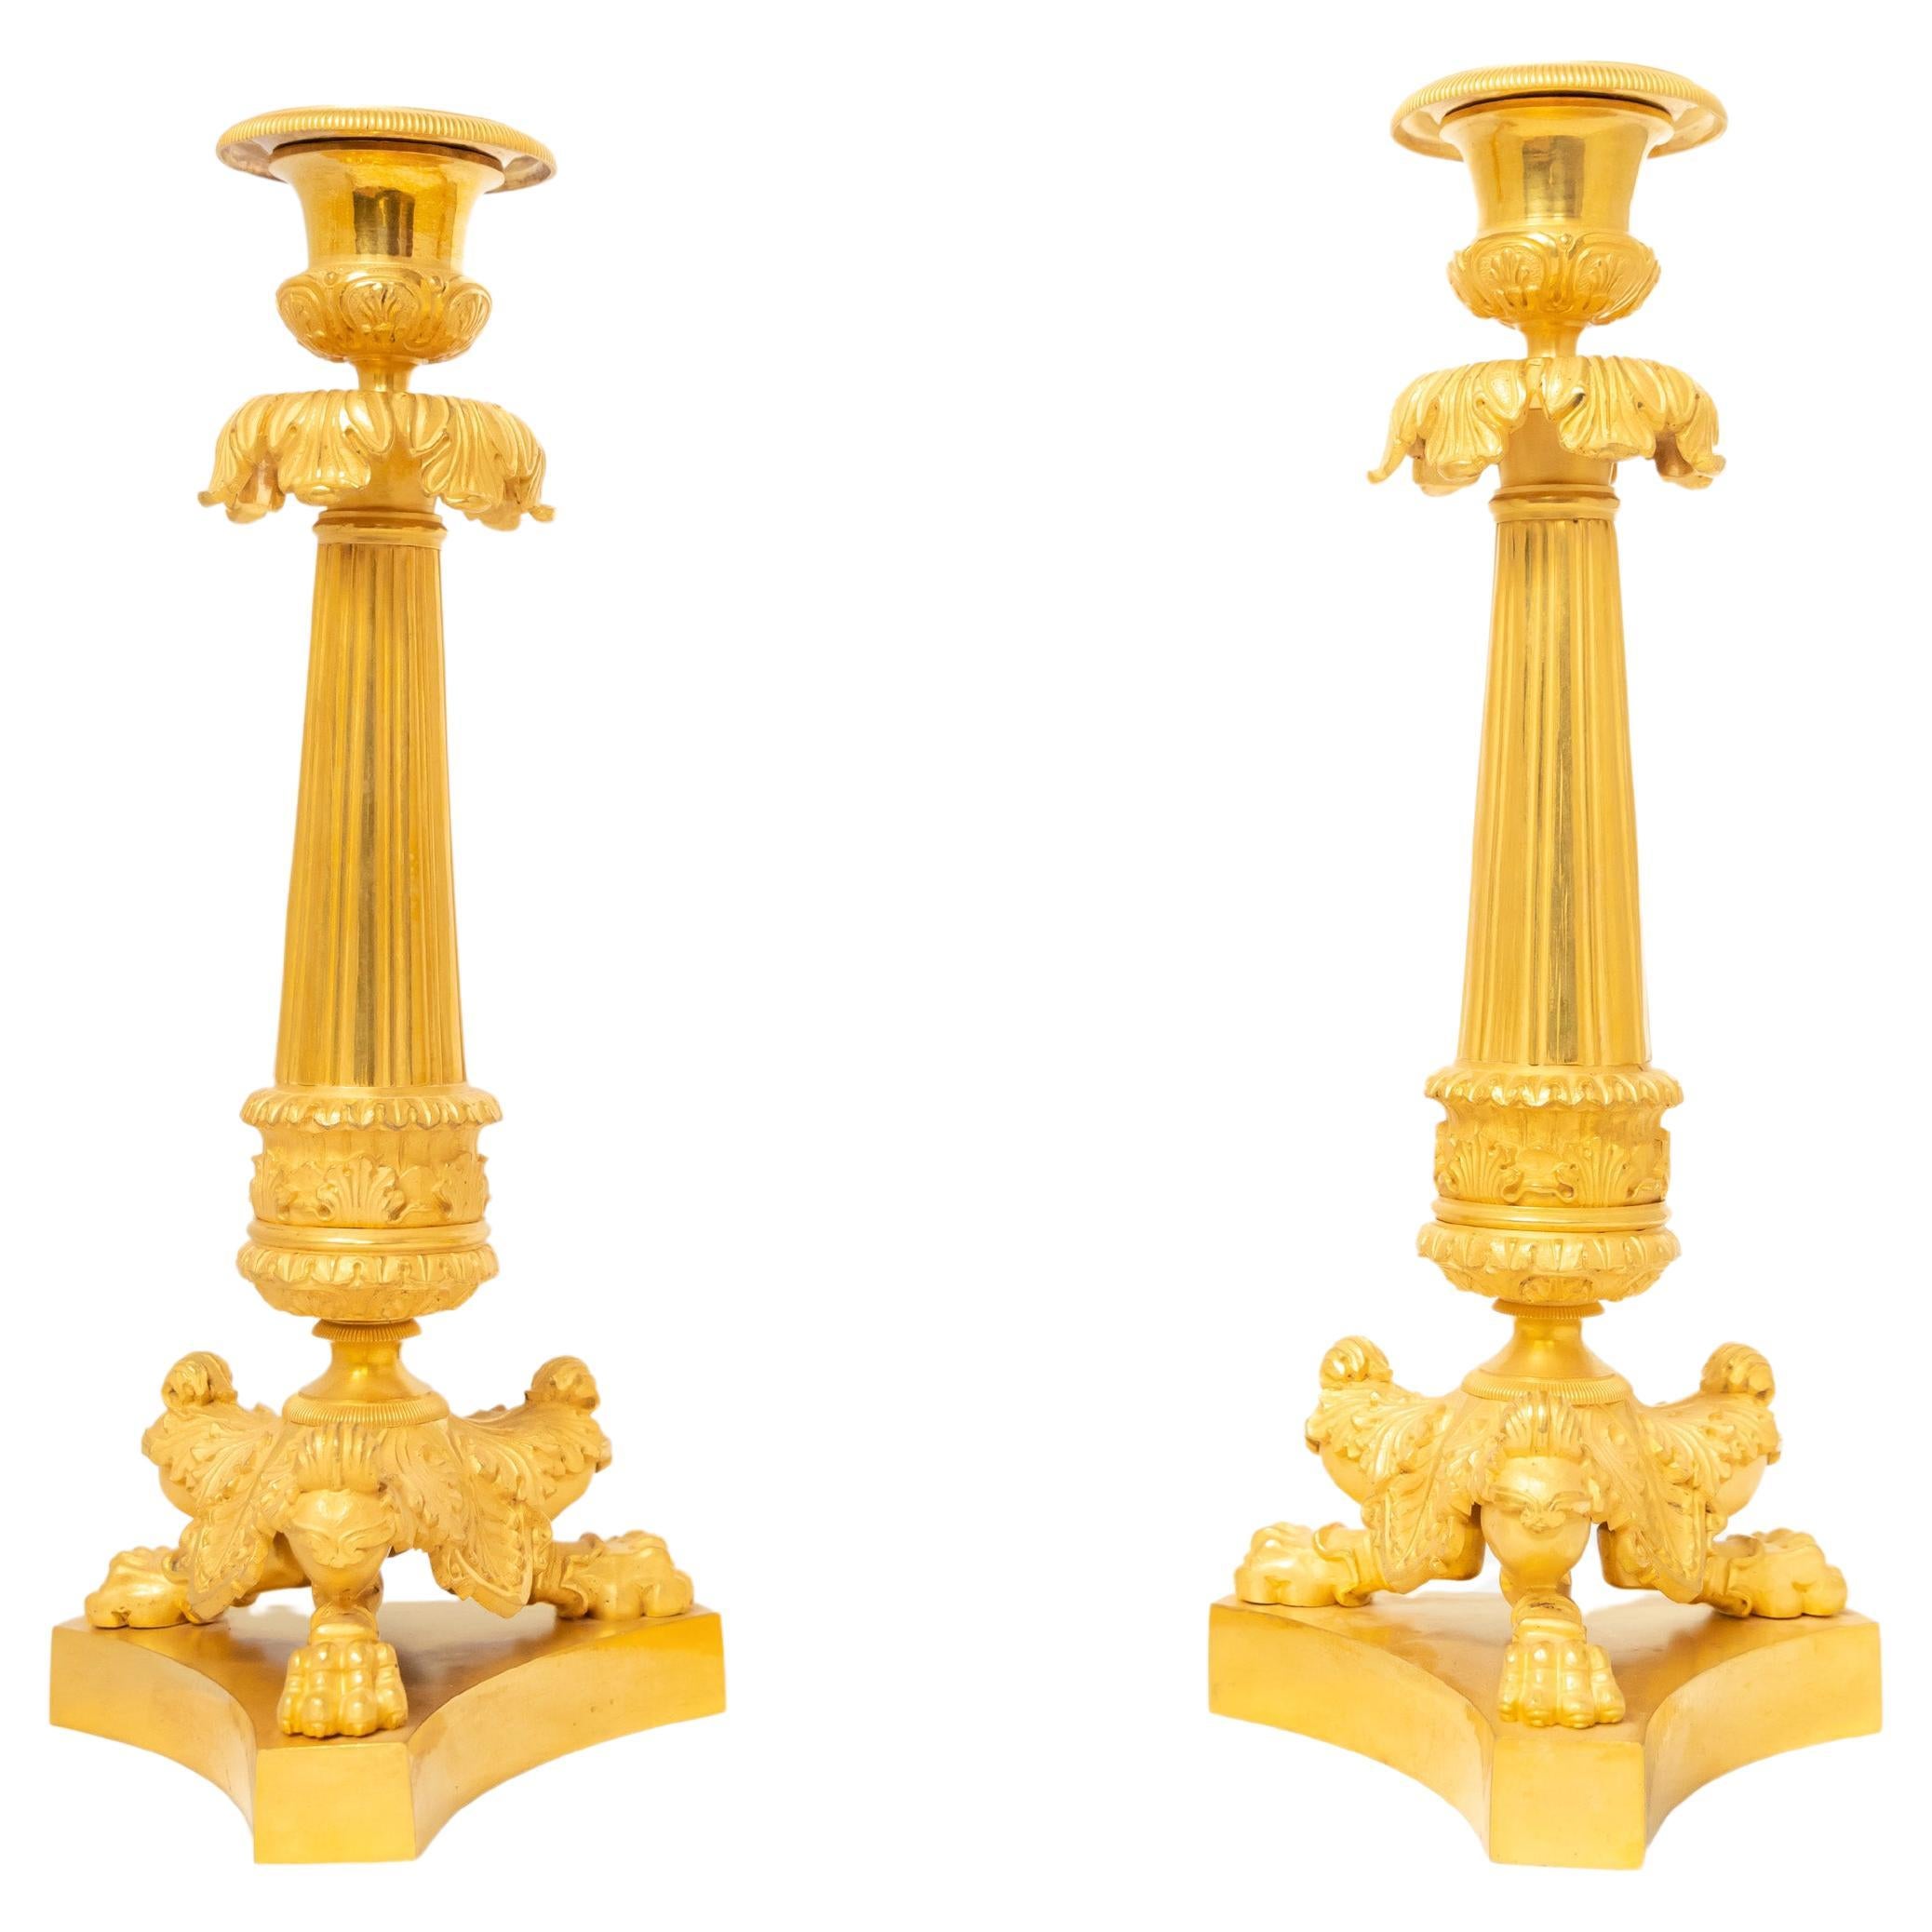 Pair of Gilded Bronze Candlesticks from French Restauration Era For Sale